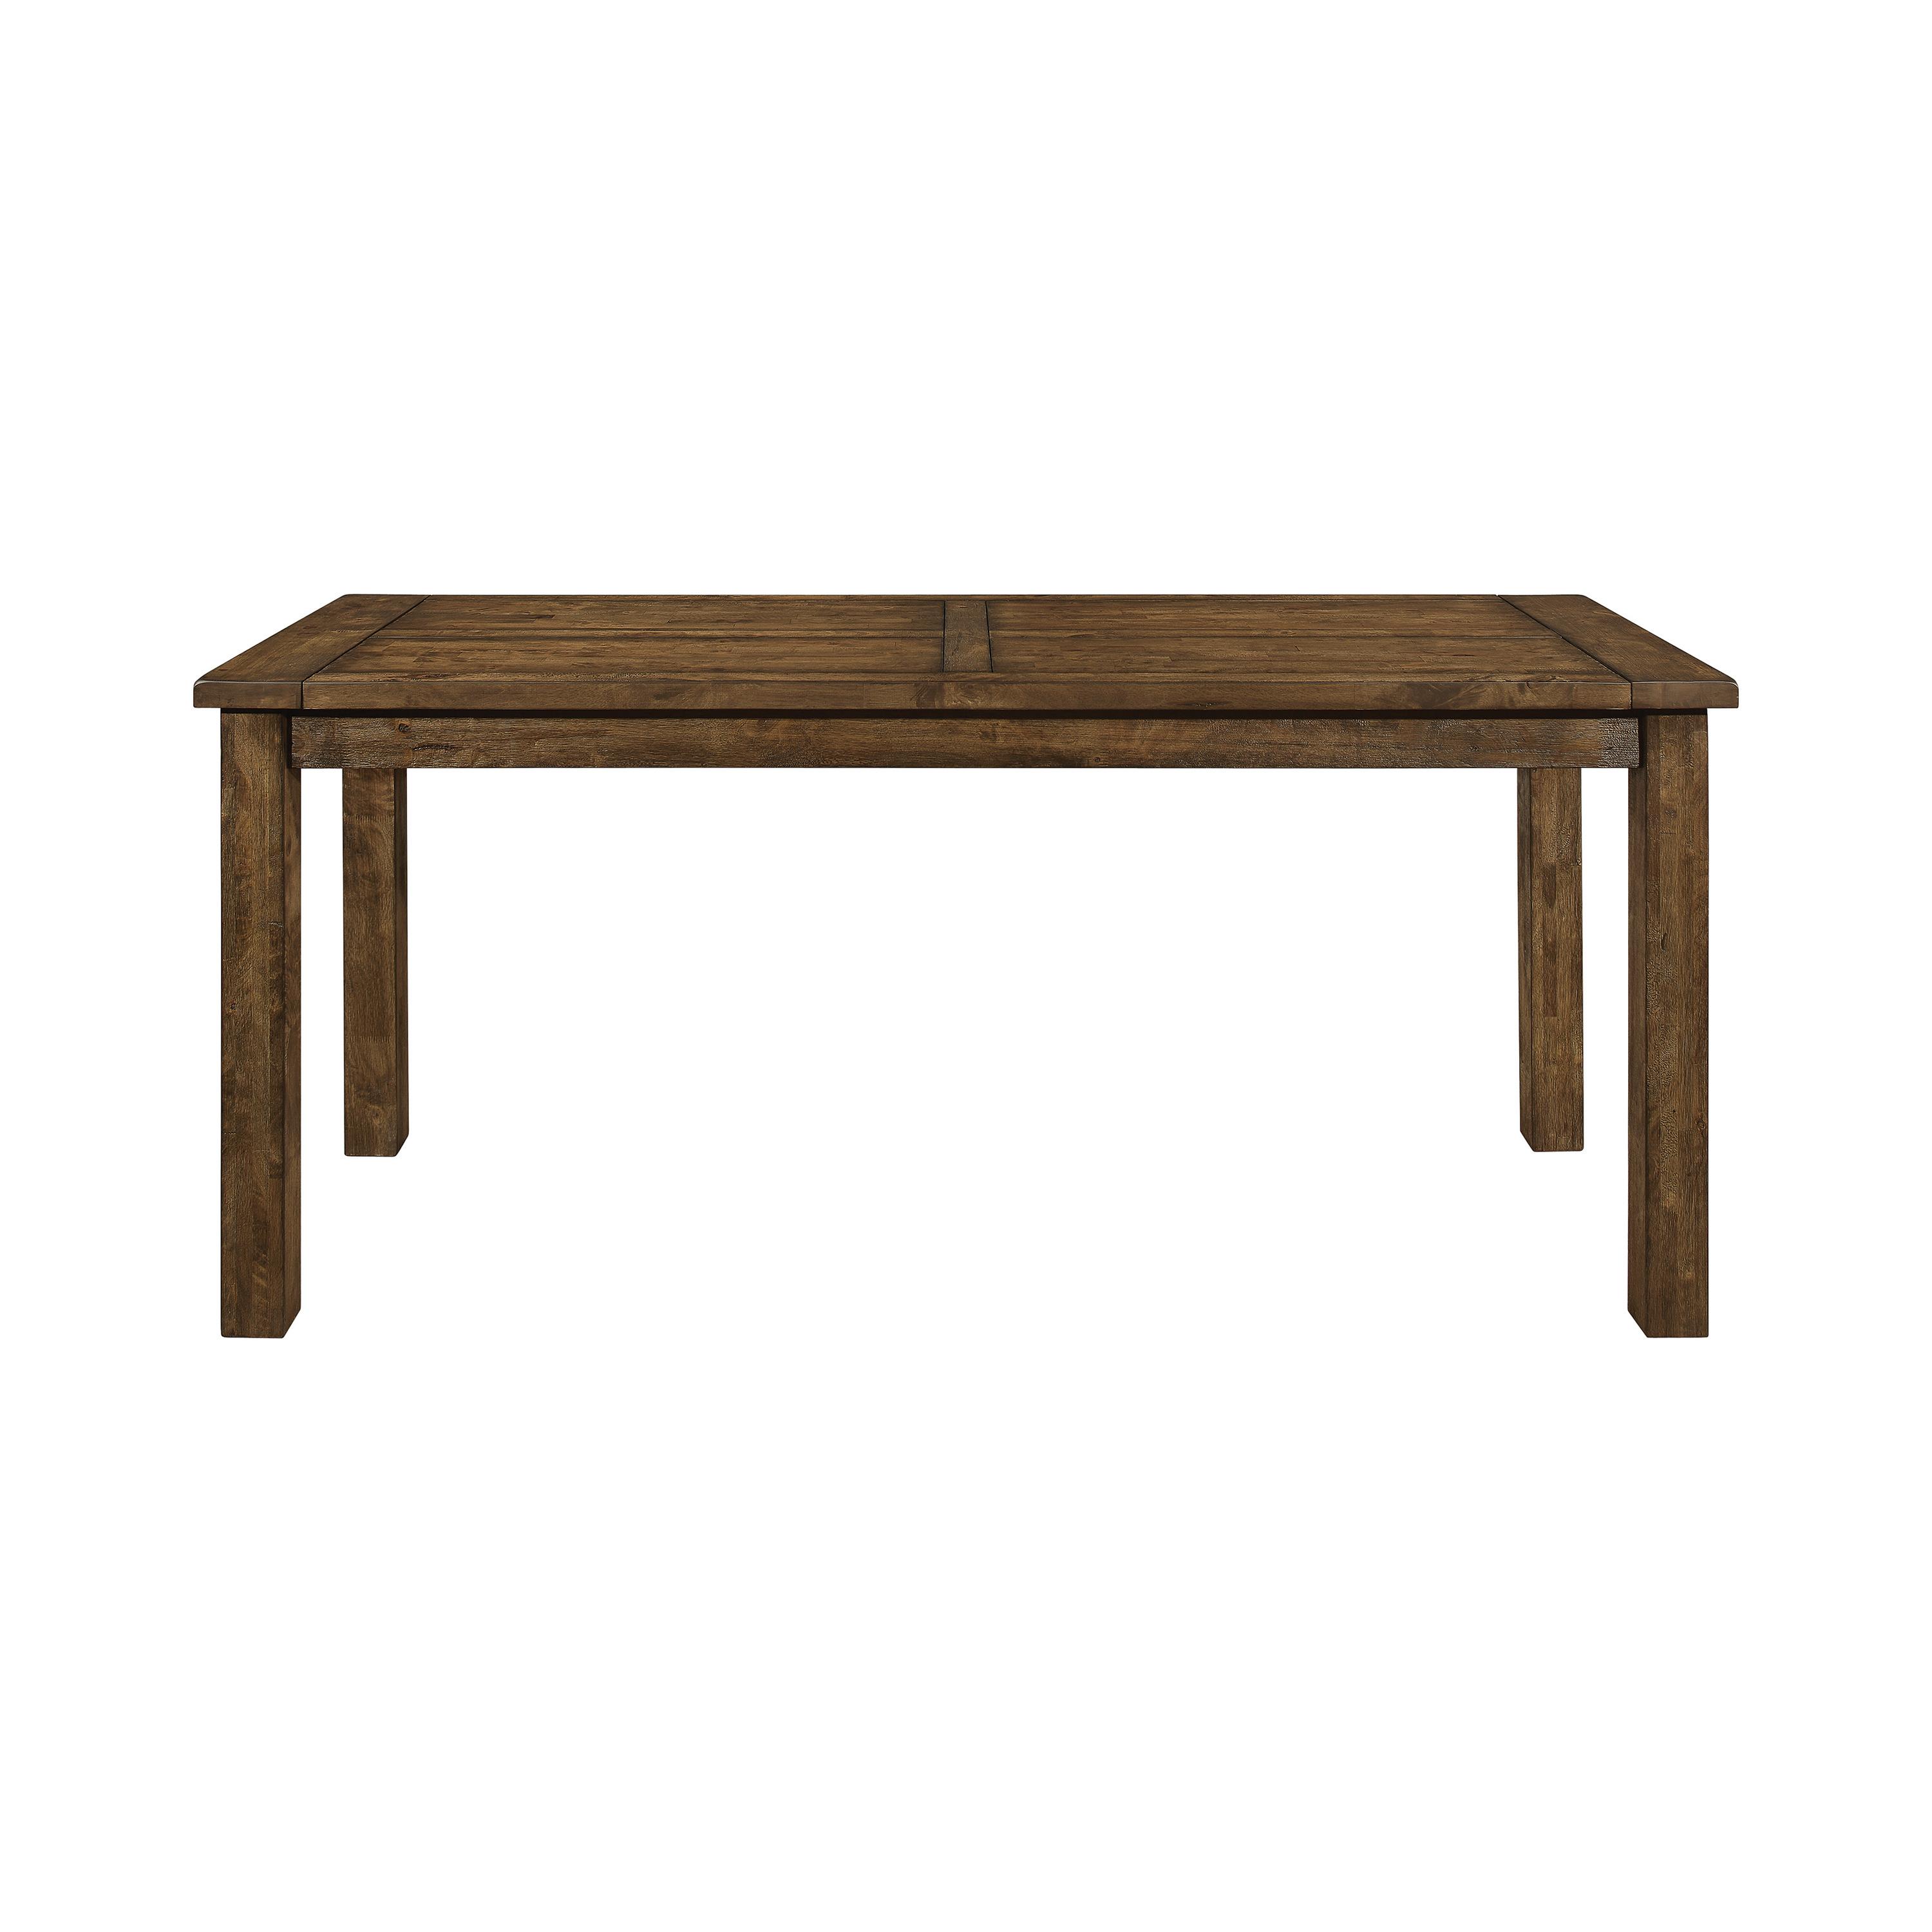 Farmhouse Counter Height Table 192028 Coleman 192028 in Golden Brown 